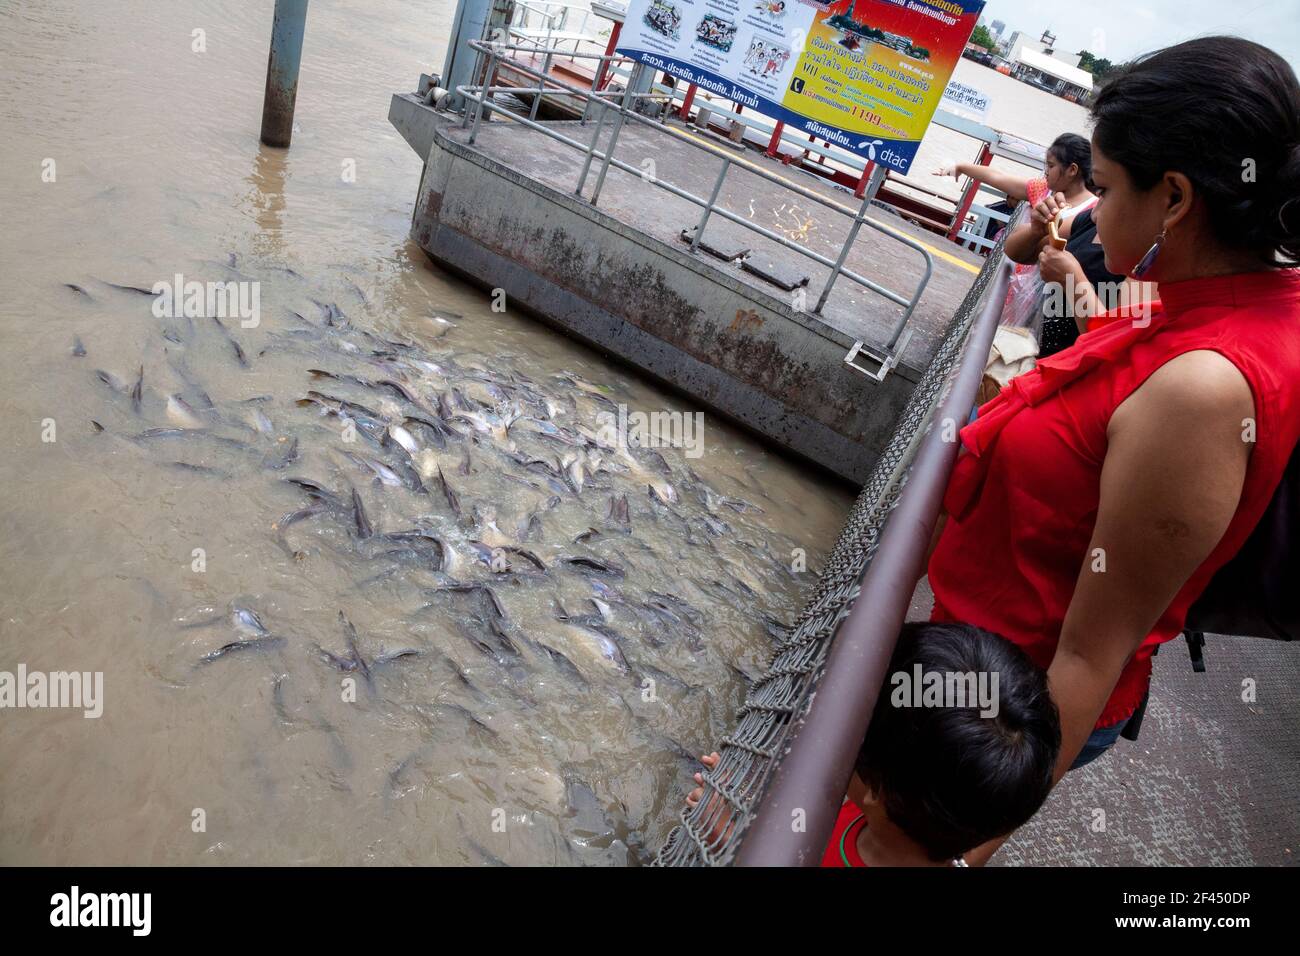 Tourists look down at catfish in the Chao Phraya river in Bangkok, Thailand. Stock Photo